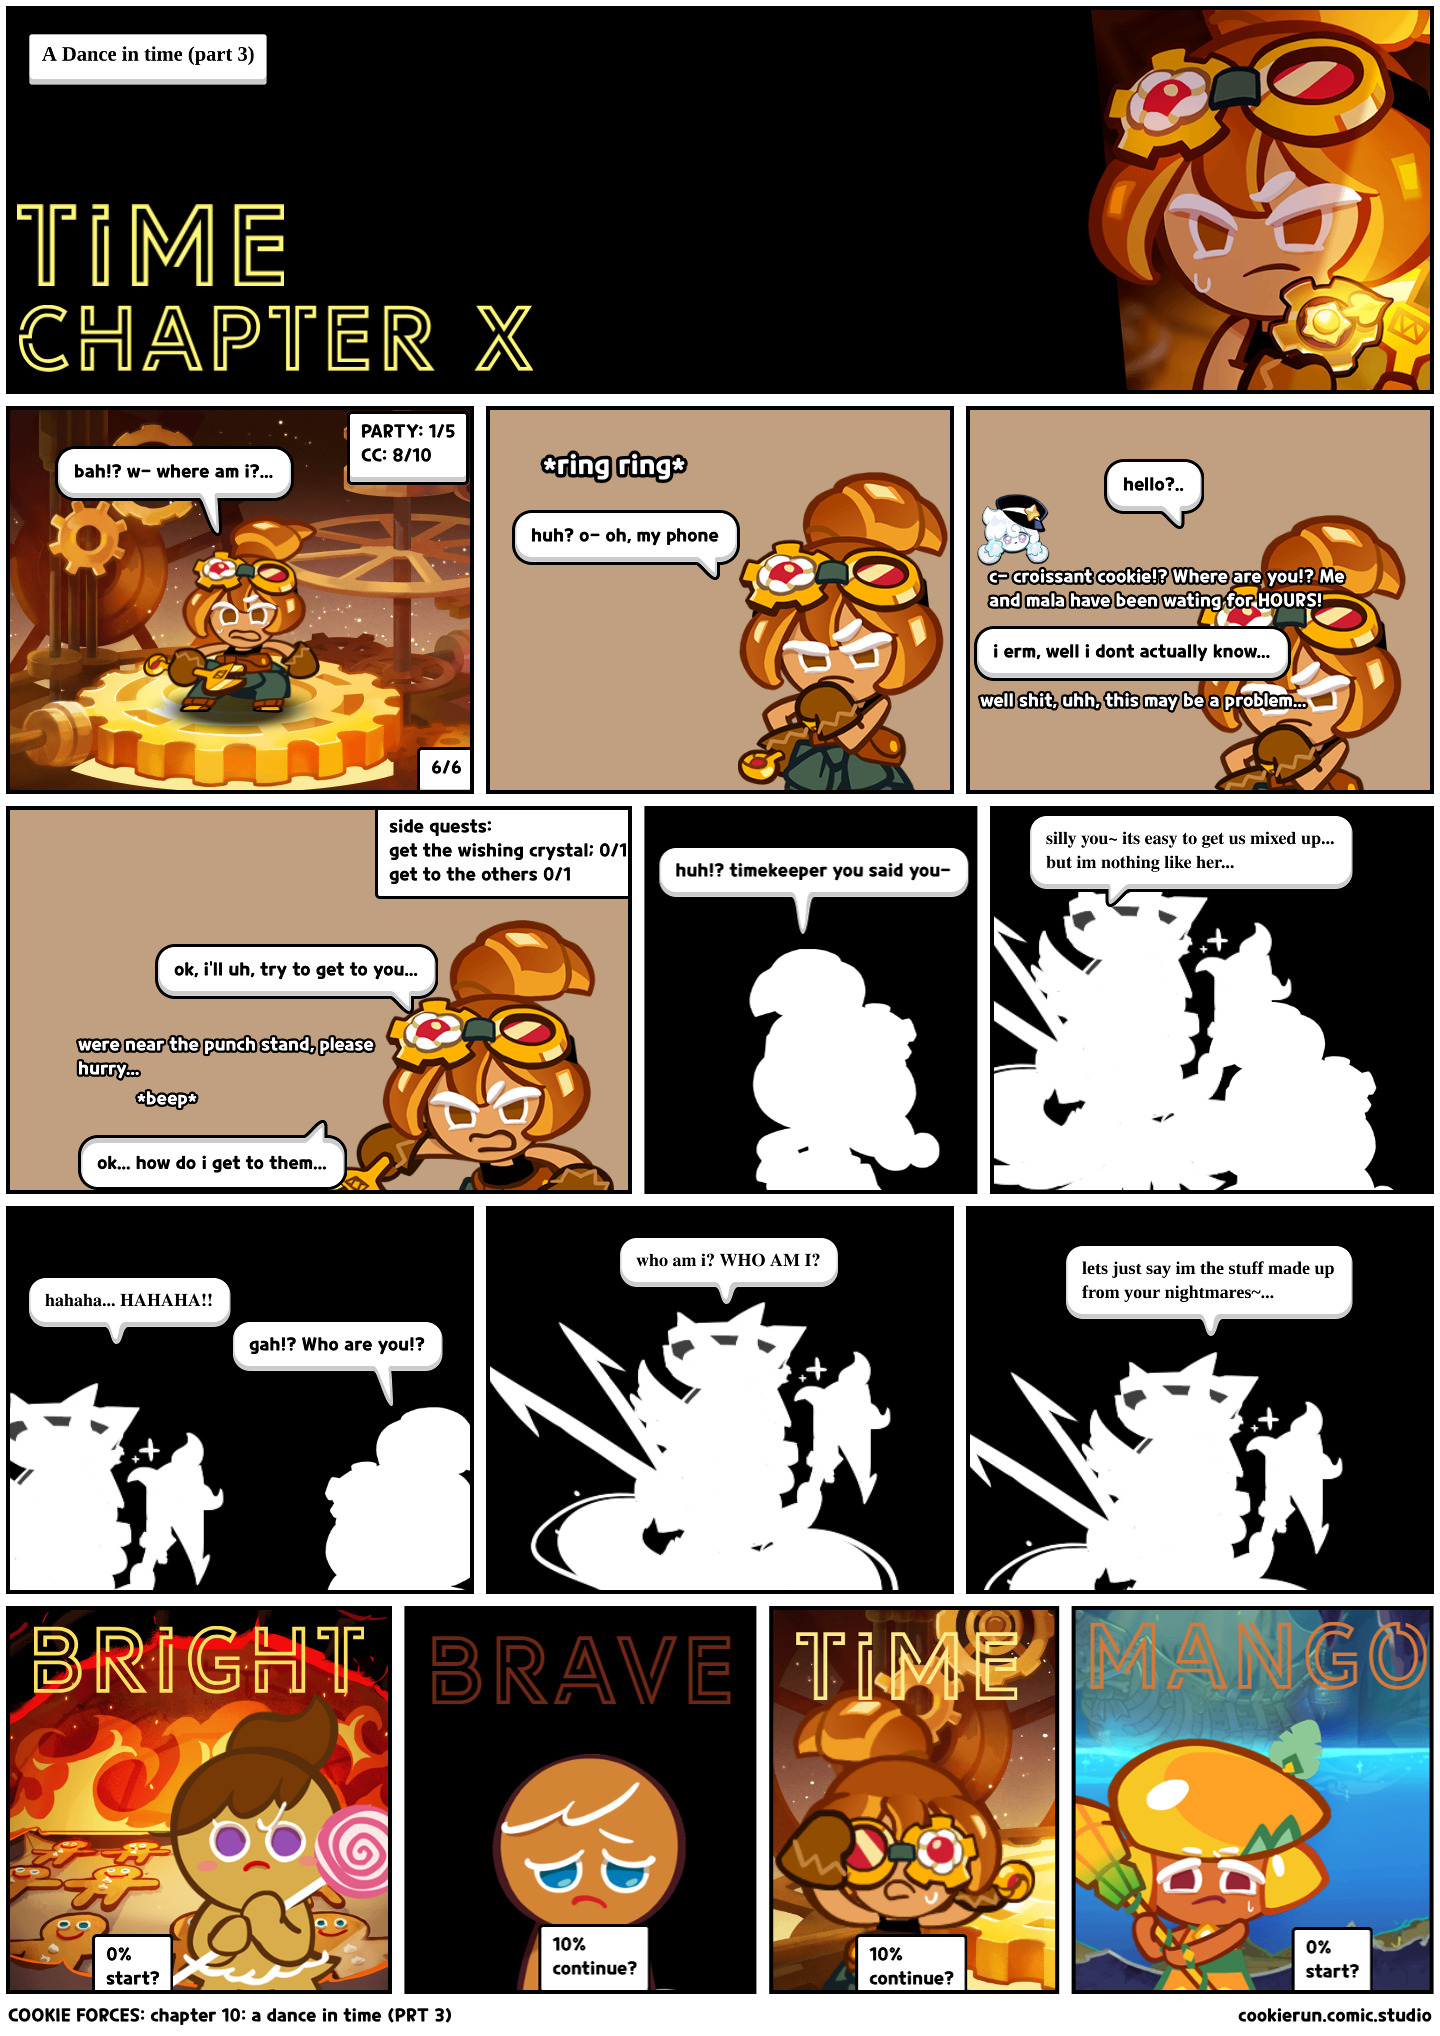 COOKIE FORCES: chapter 10: a dance in time (PRT 3)